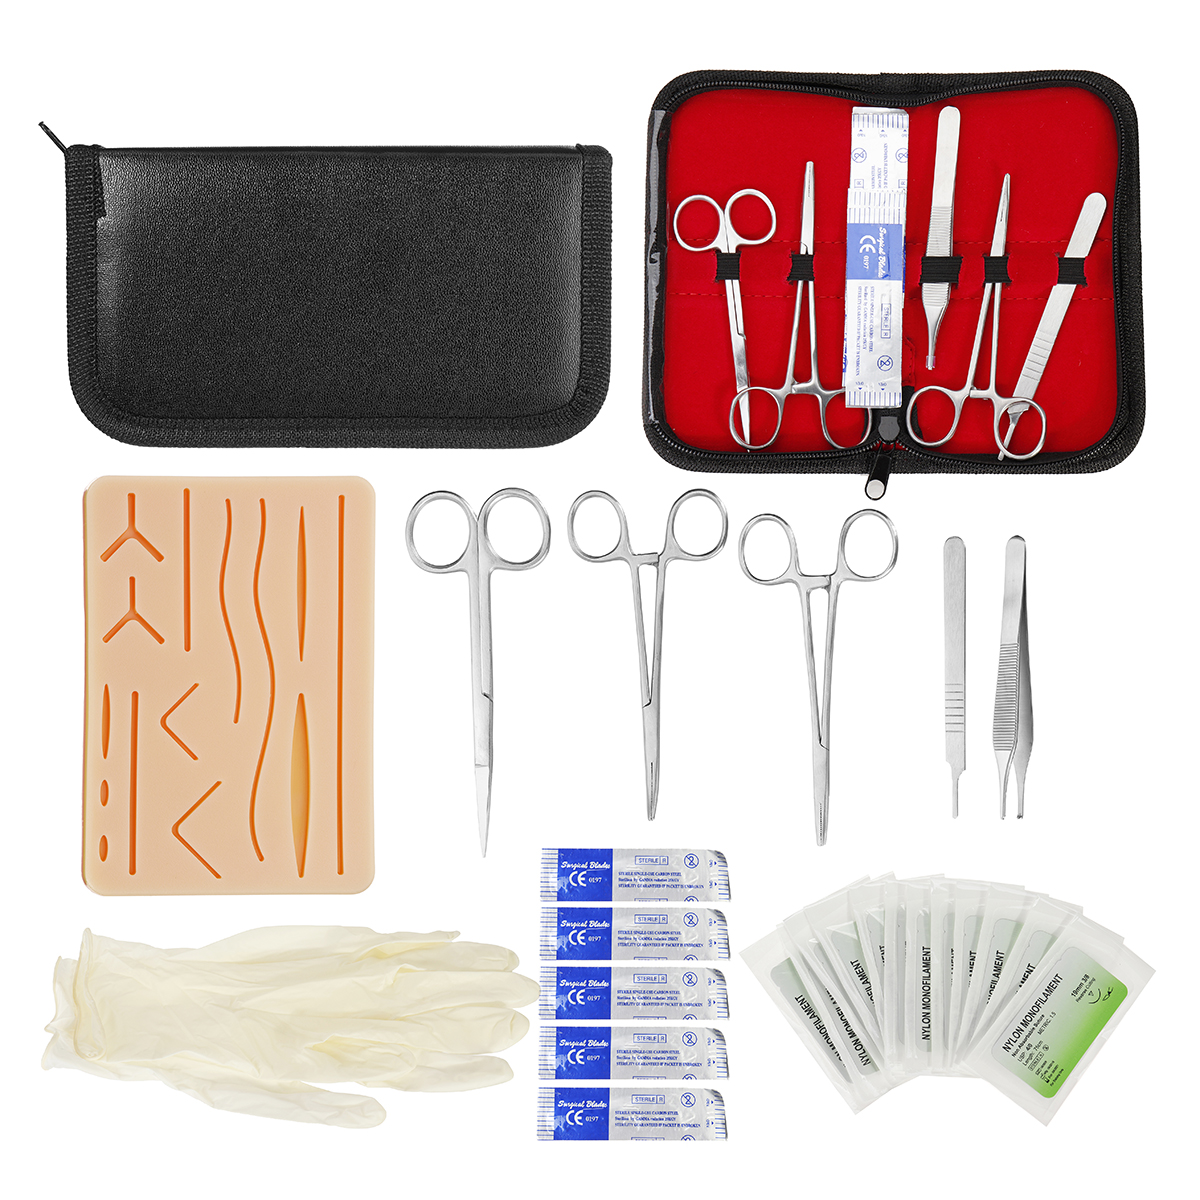 25-In-1-Skin-Suture-Surgical-Training-Kit-Silicone-Pad-Needle-Scissors-Tools-Kit-1417313-10